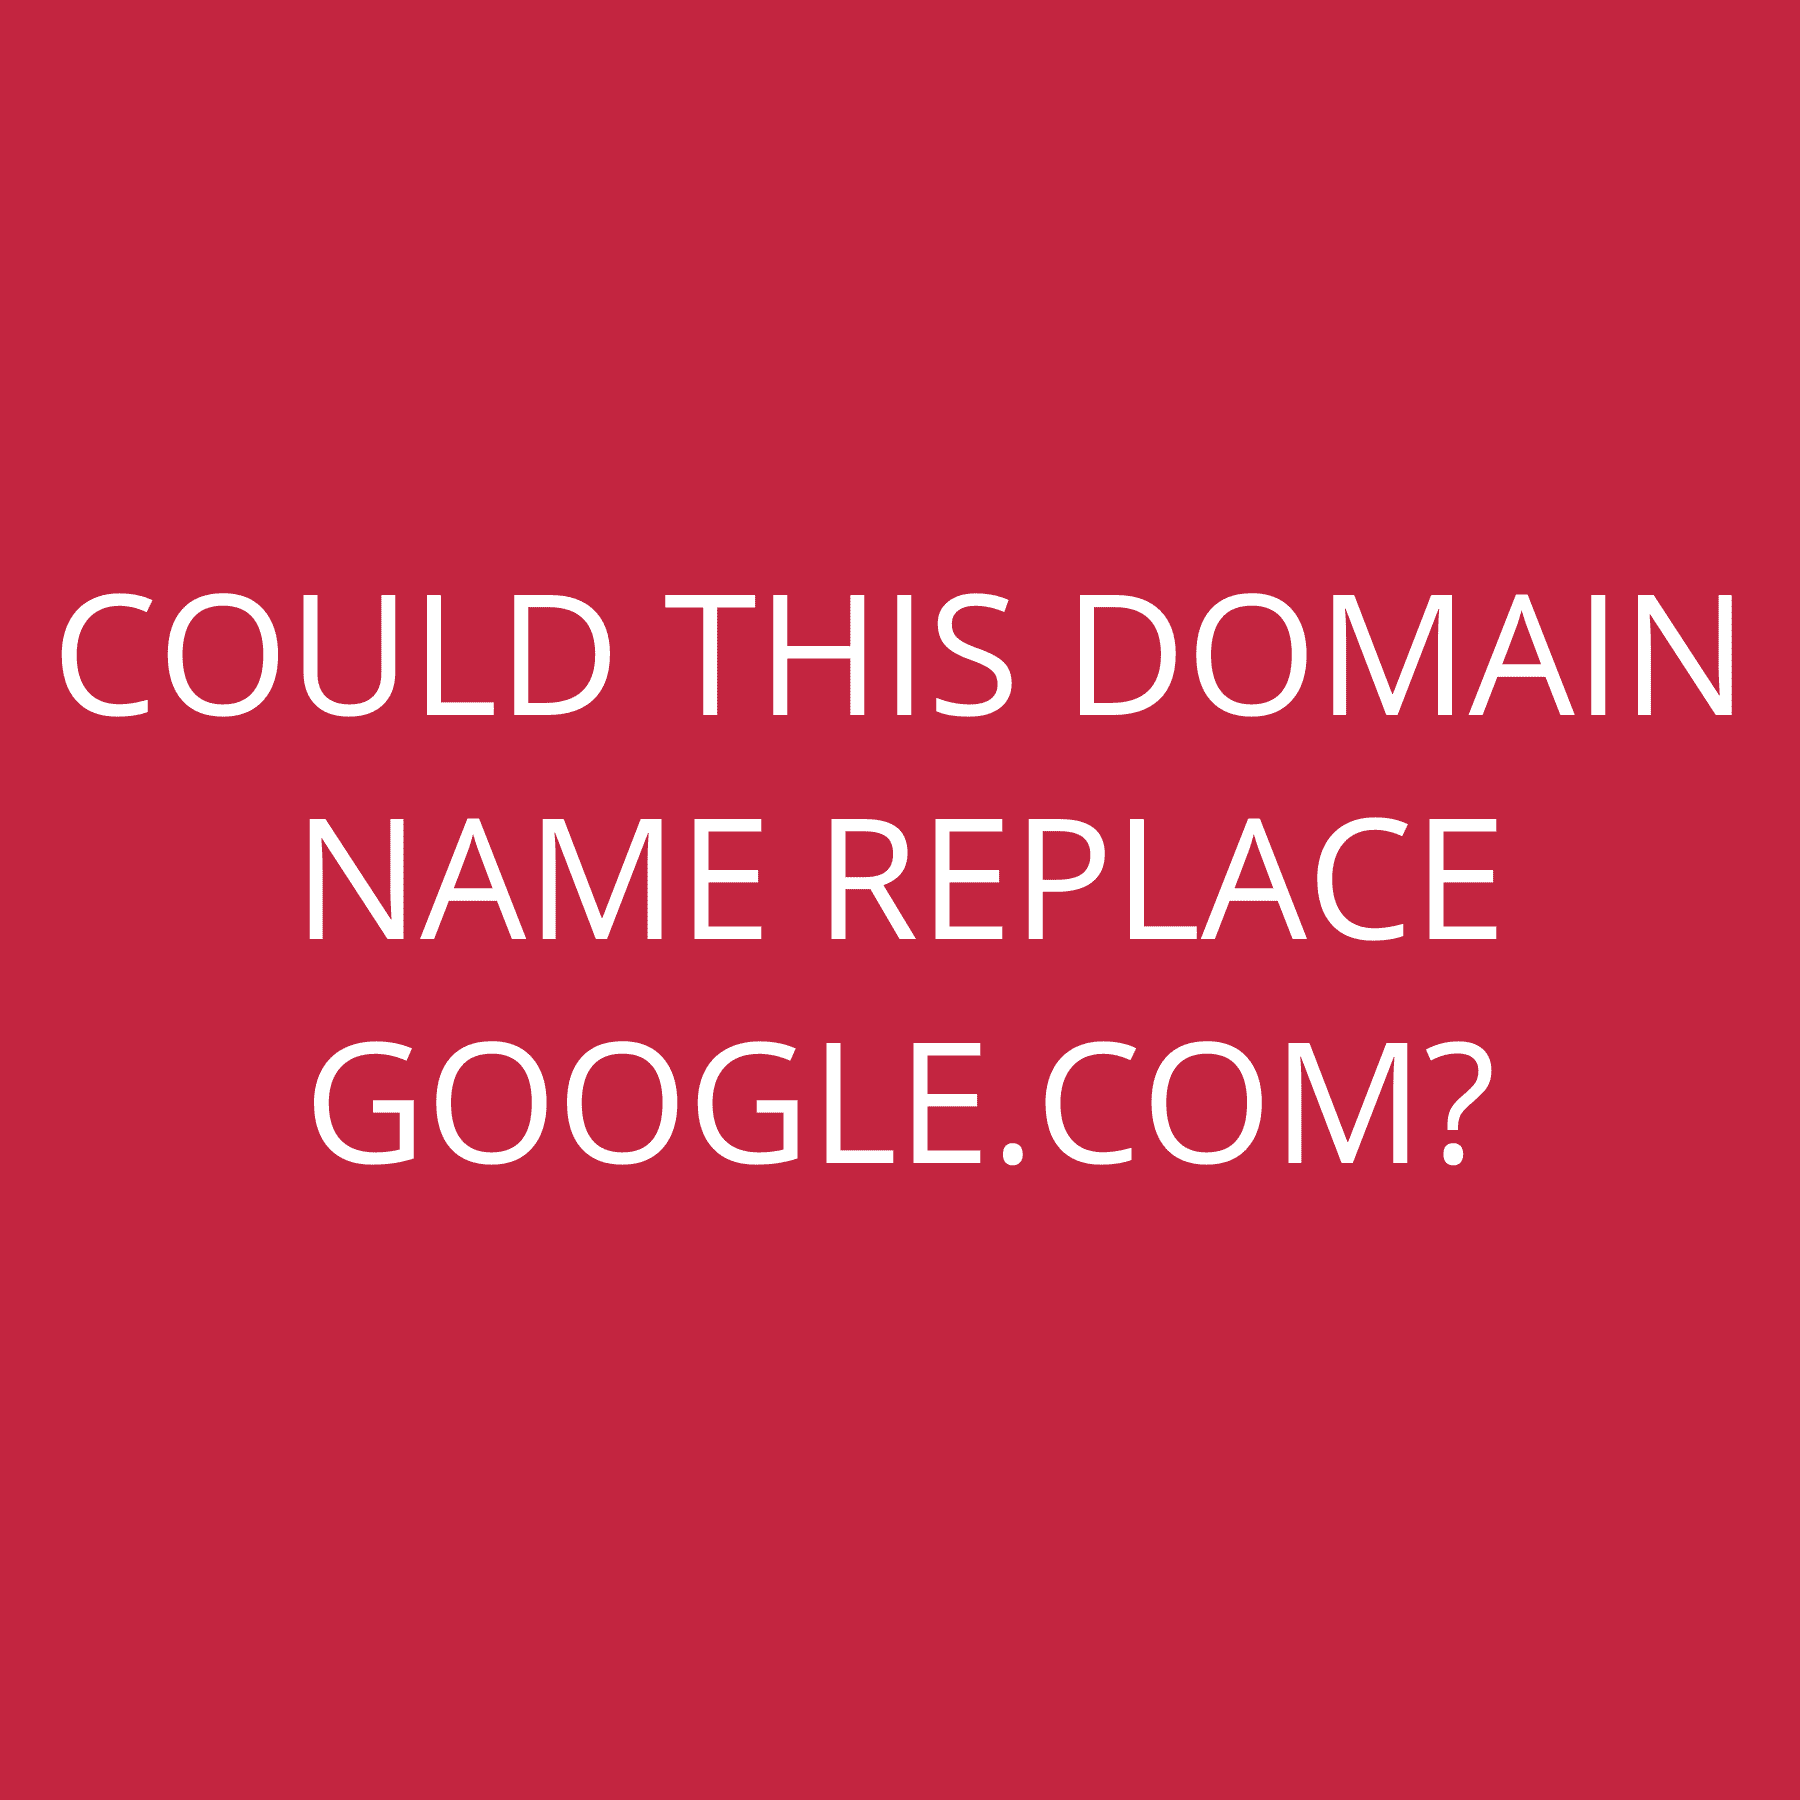 Could this domain name replace Google.com?